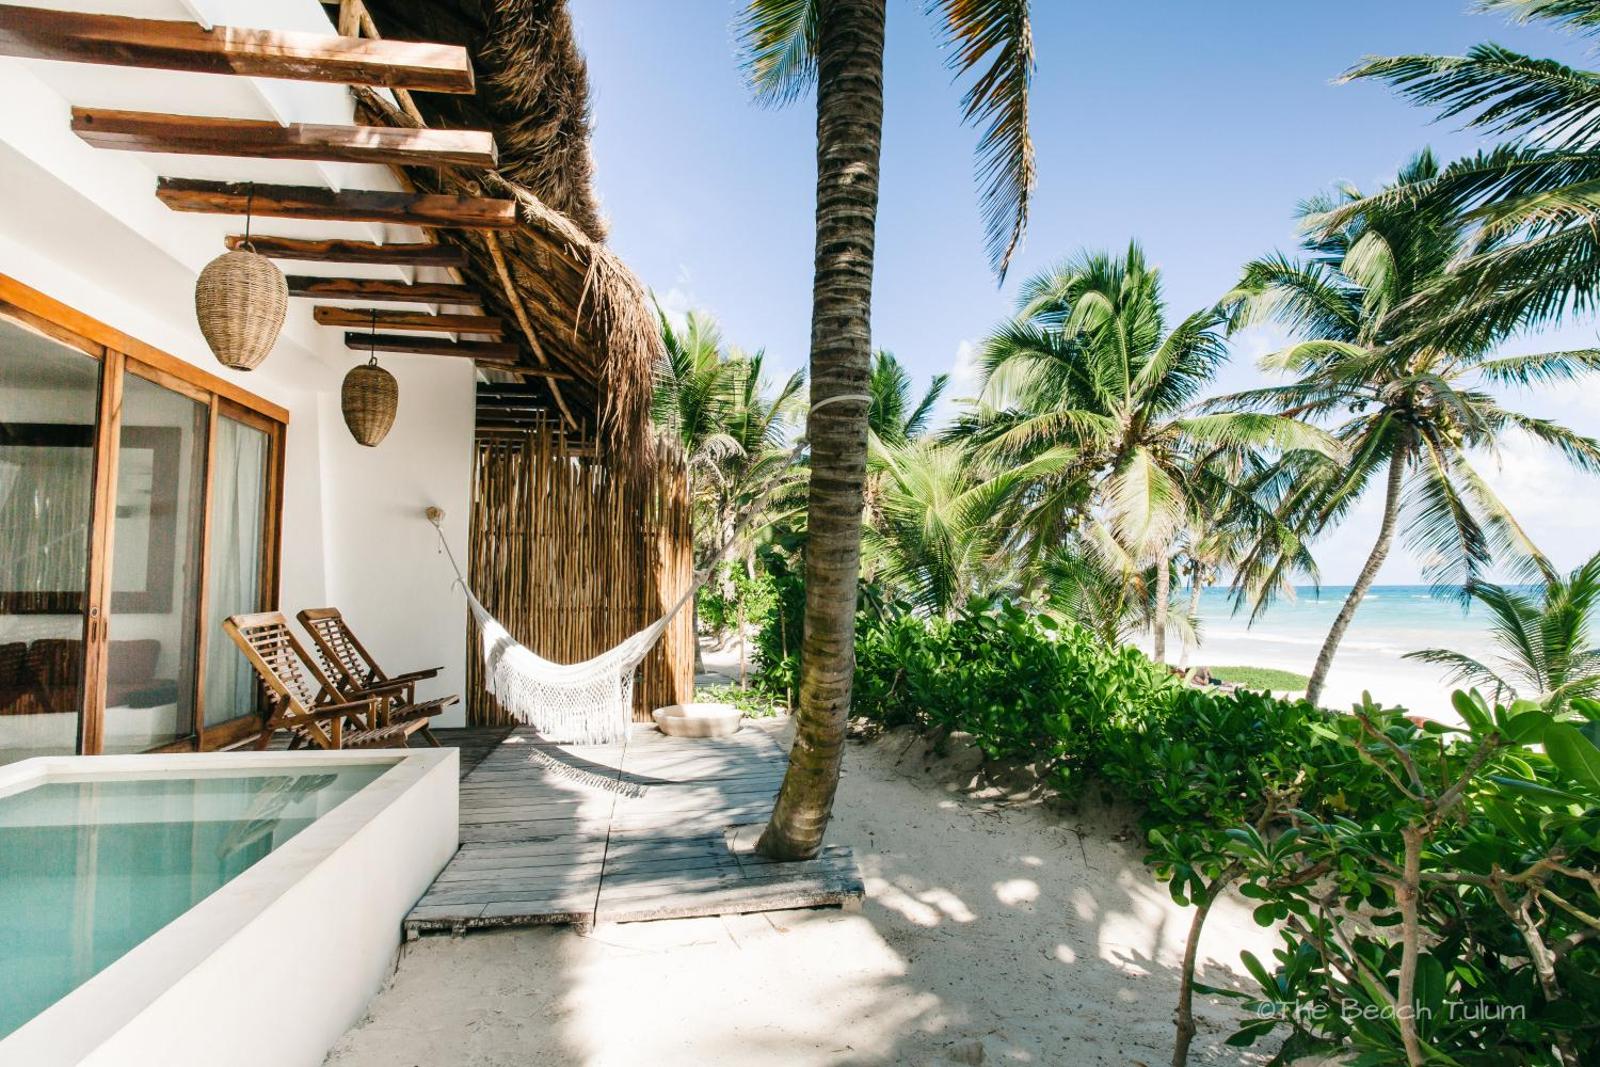 Hotel for Adults-only - The Beach Tulum